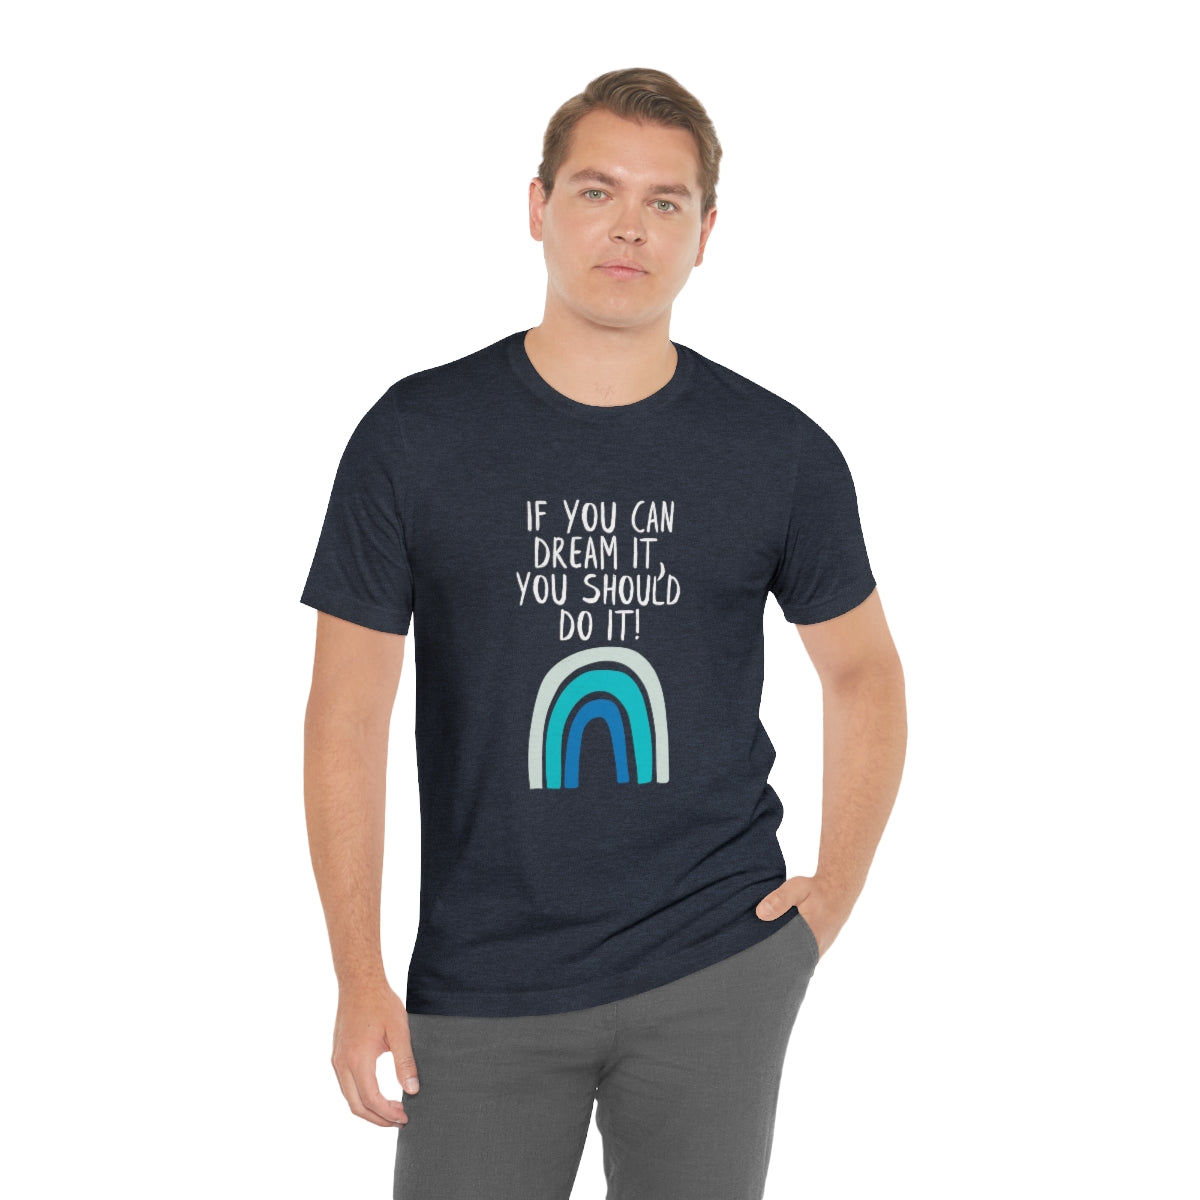 Motivational T Shirts, If You Can Dream It, You Should Do It, Blue Rainbow Quote Shirt, Positive Sayings, Quotes on T Shirts, Unisex Tees